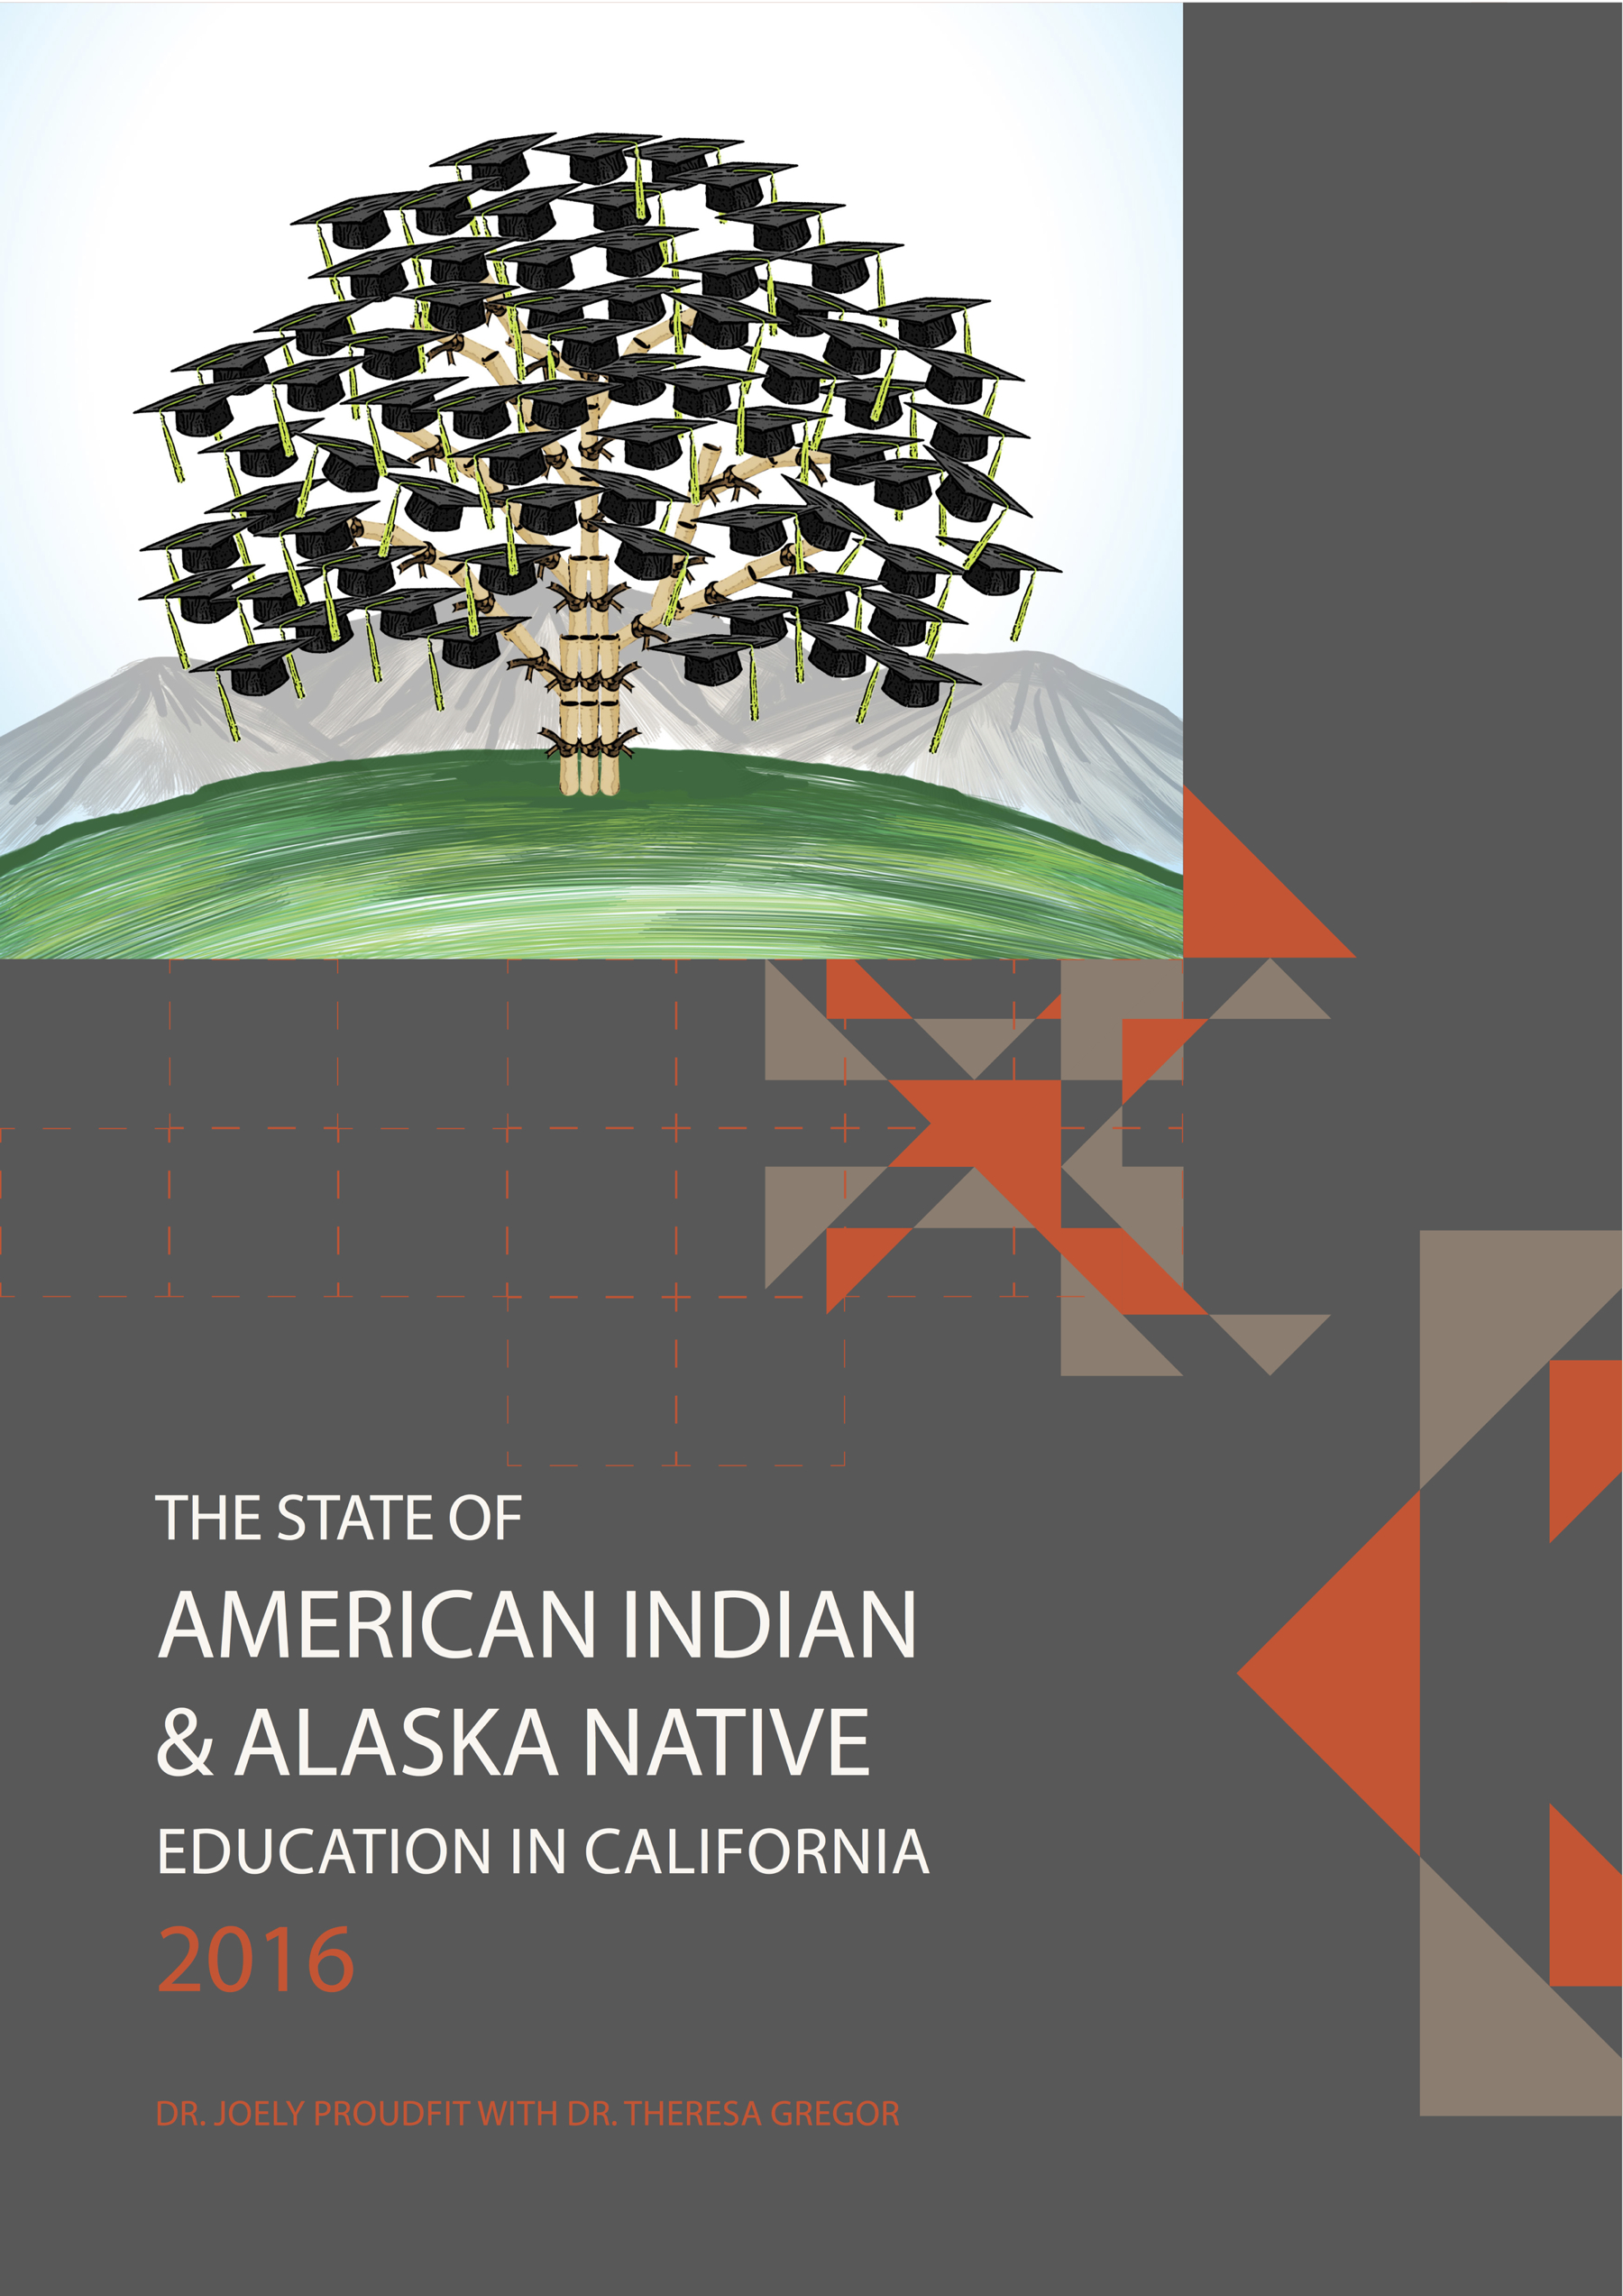 Cover of the The State of American Indian and Alaskan Native (AIAN) Education in California 2016 Report